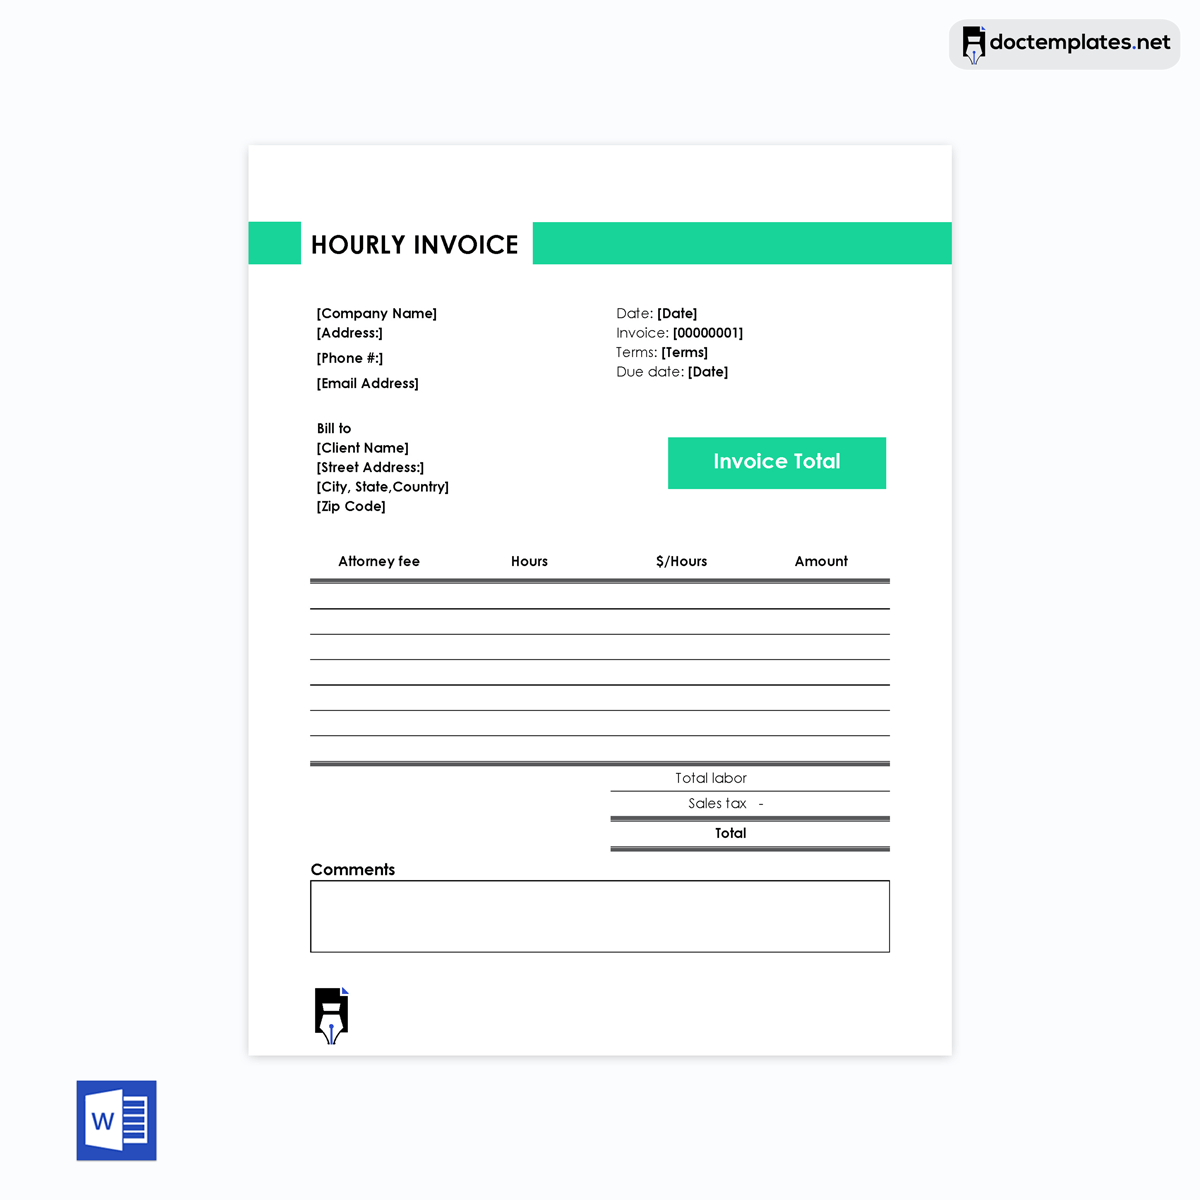  hourly invoice template excel-06